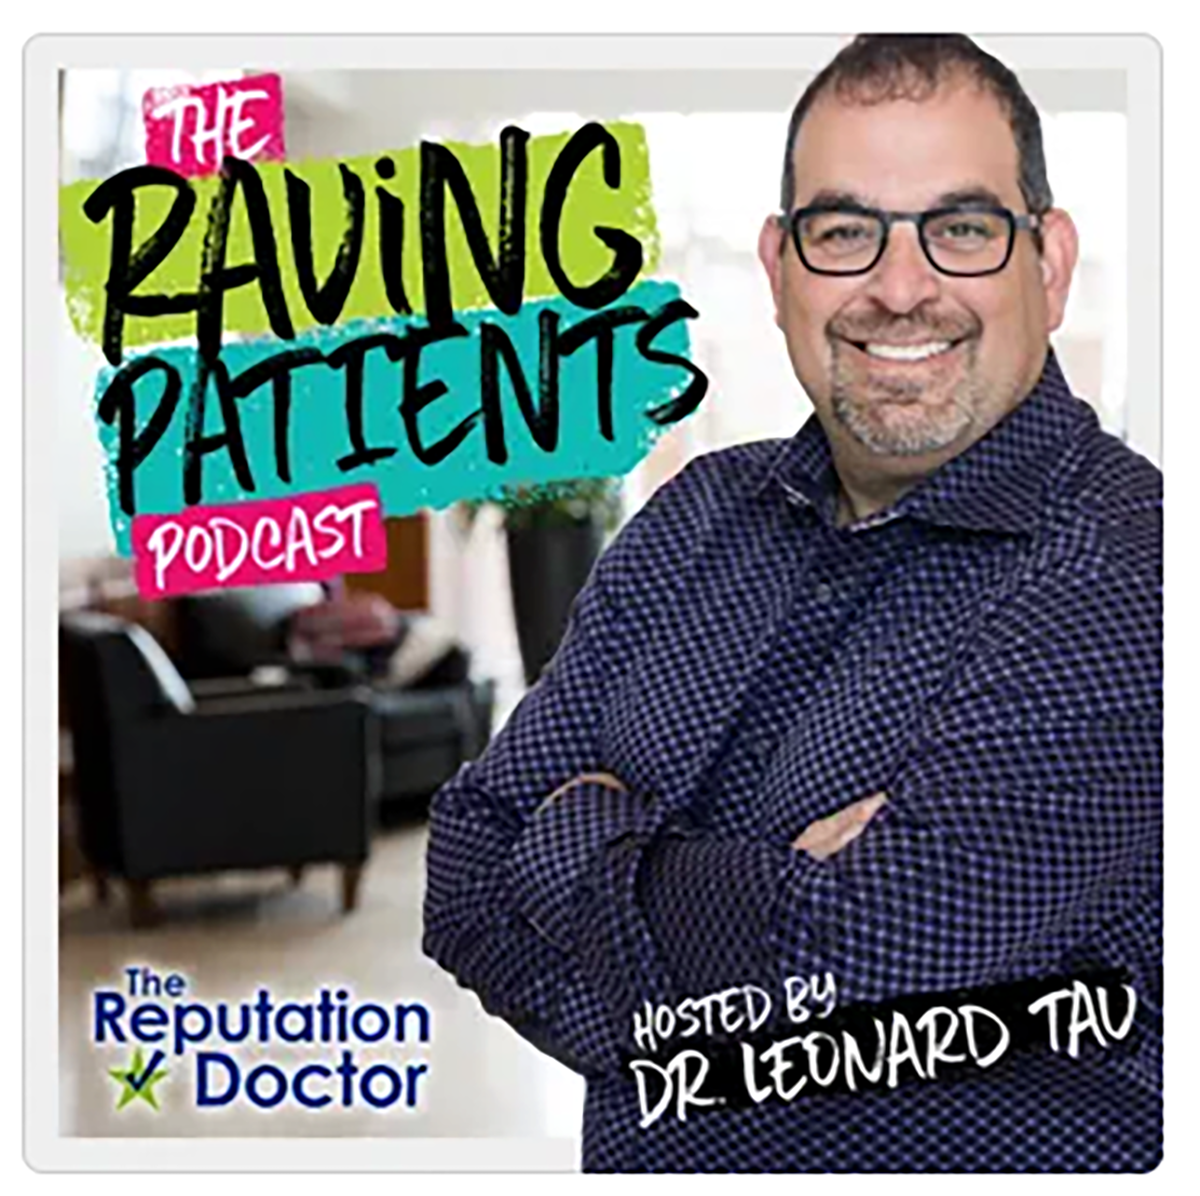 The Raving Patients Podcast logo